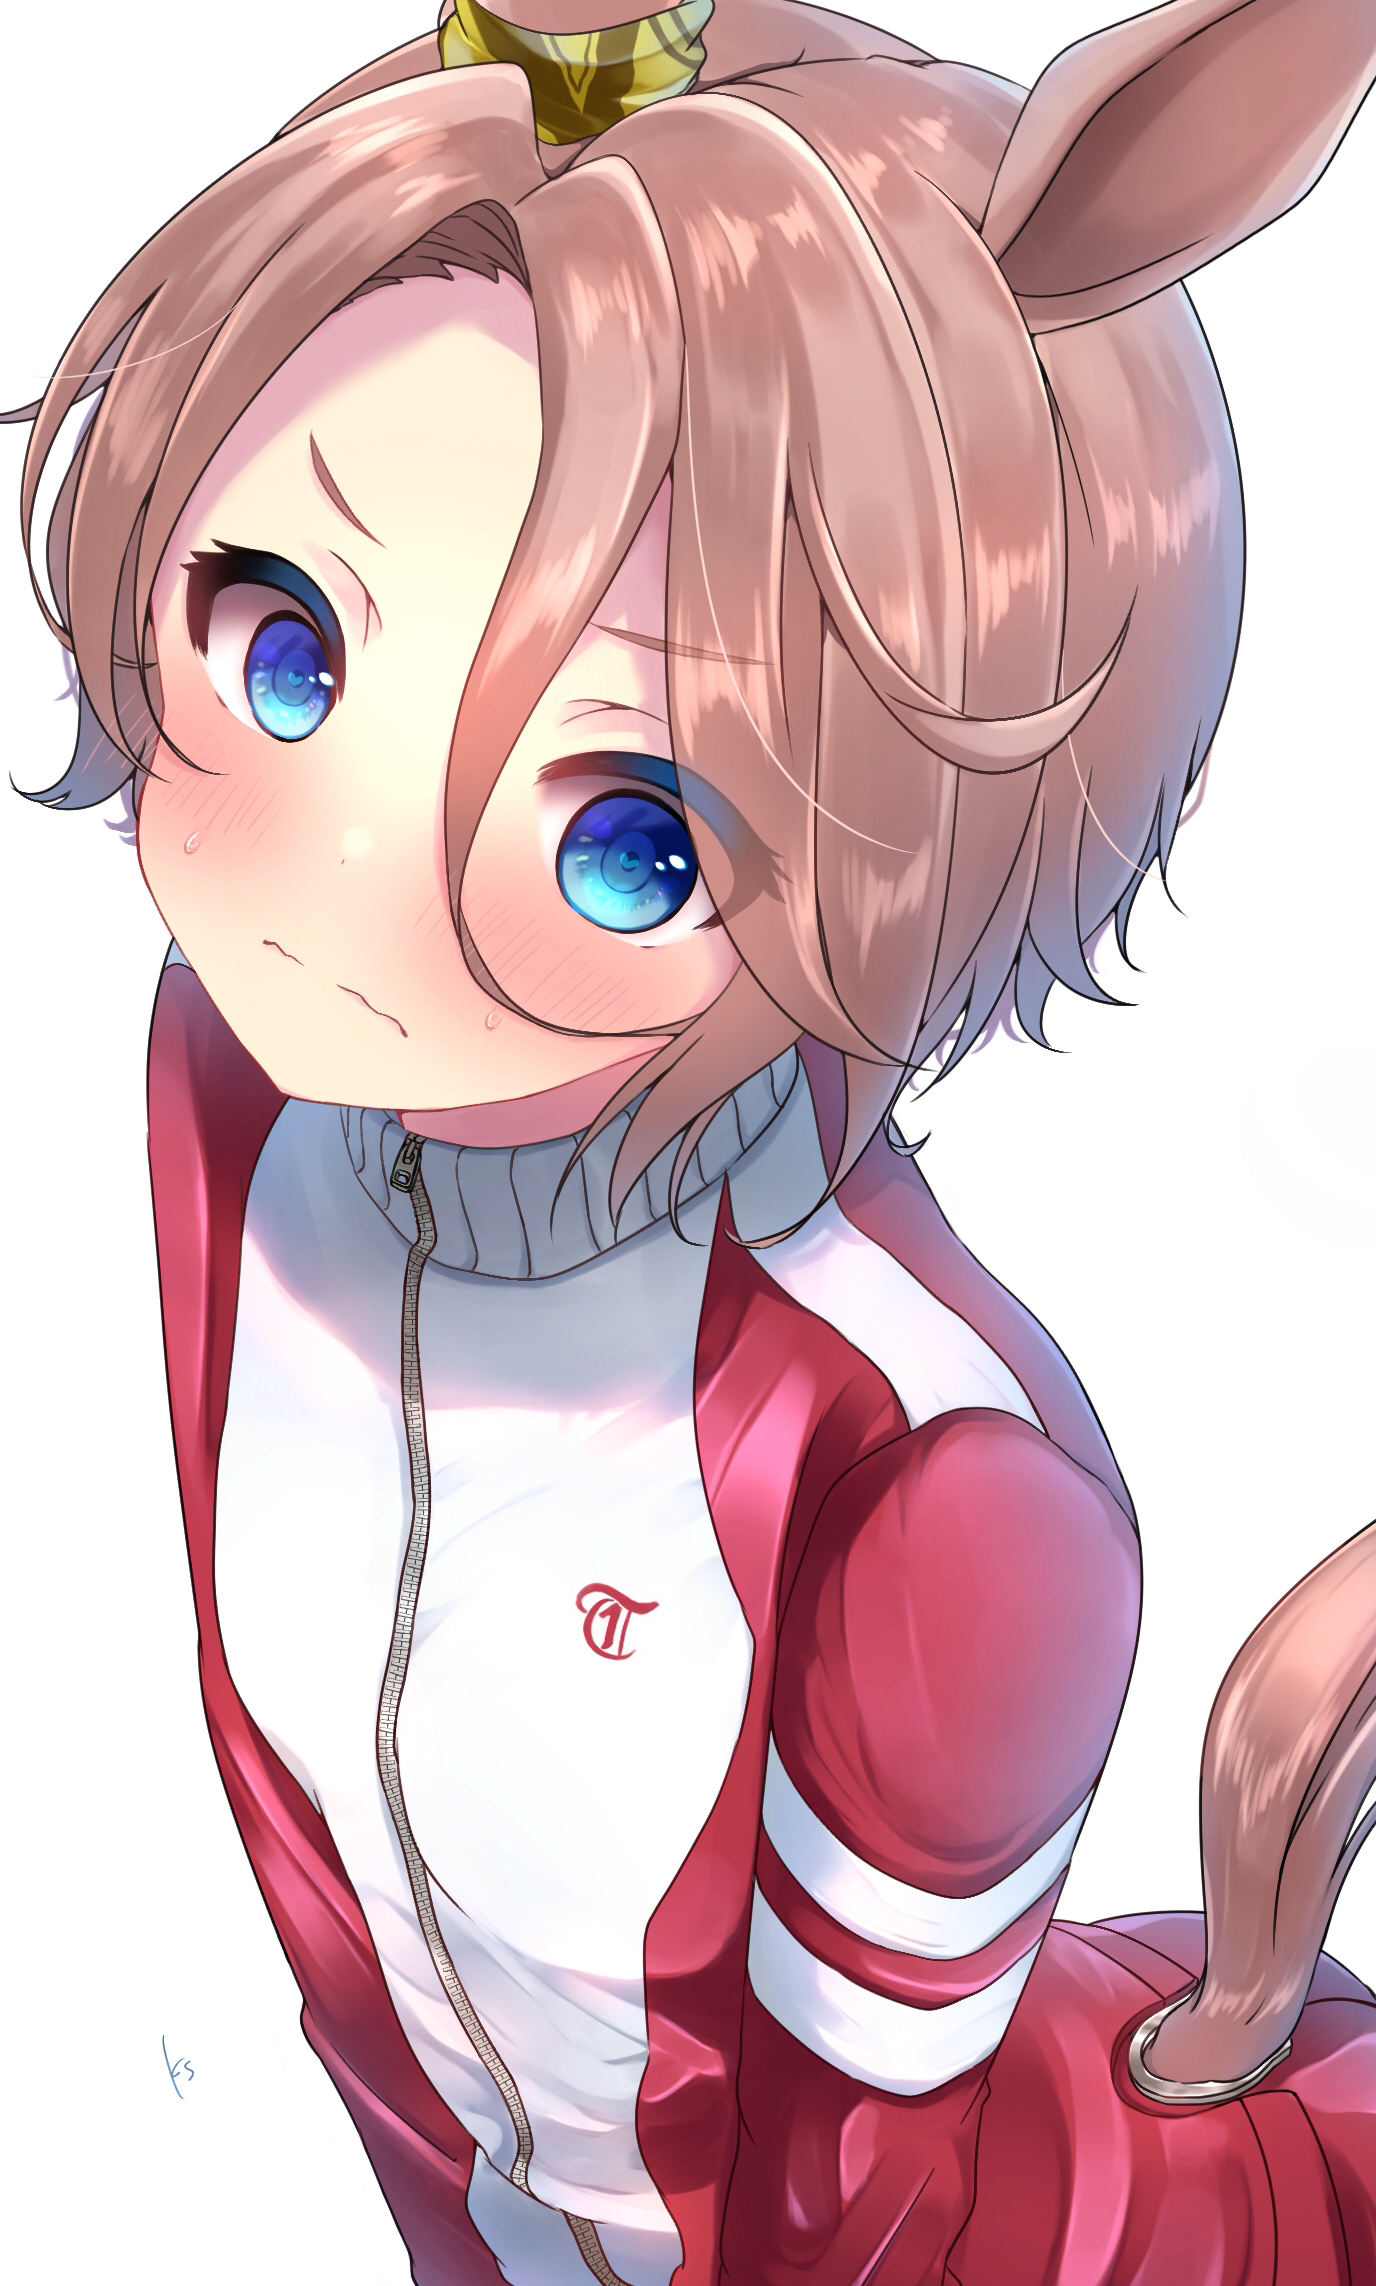 Uma Musume Pretty Derby Short Hair Embarrassed Tail Tracksuit Gym Clothes Blue Eyes Tomboy Looking A 1376x2286